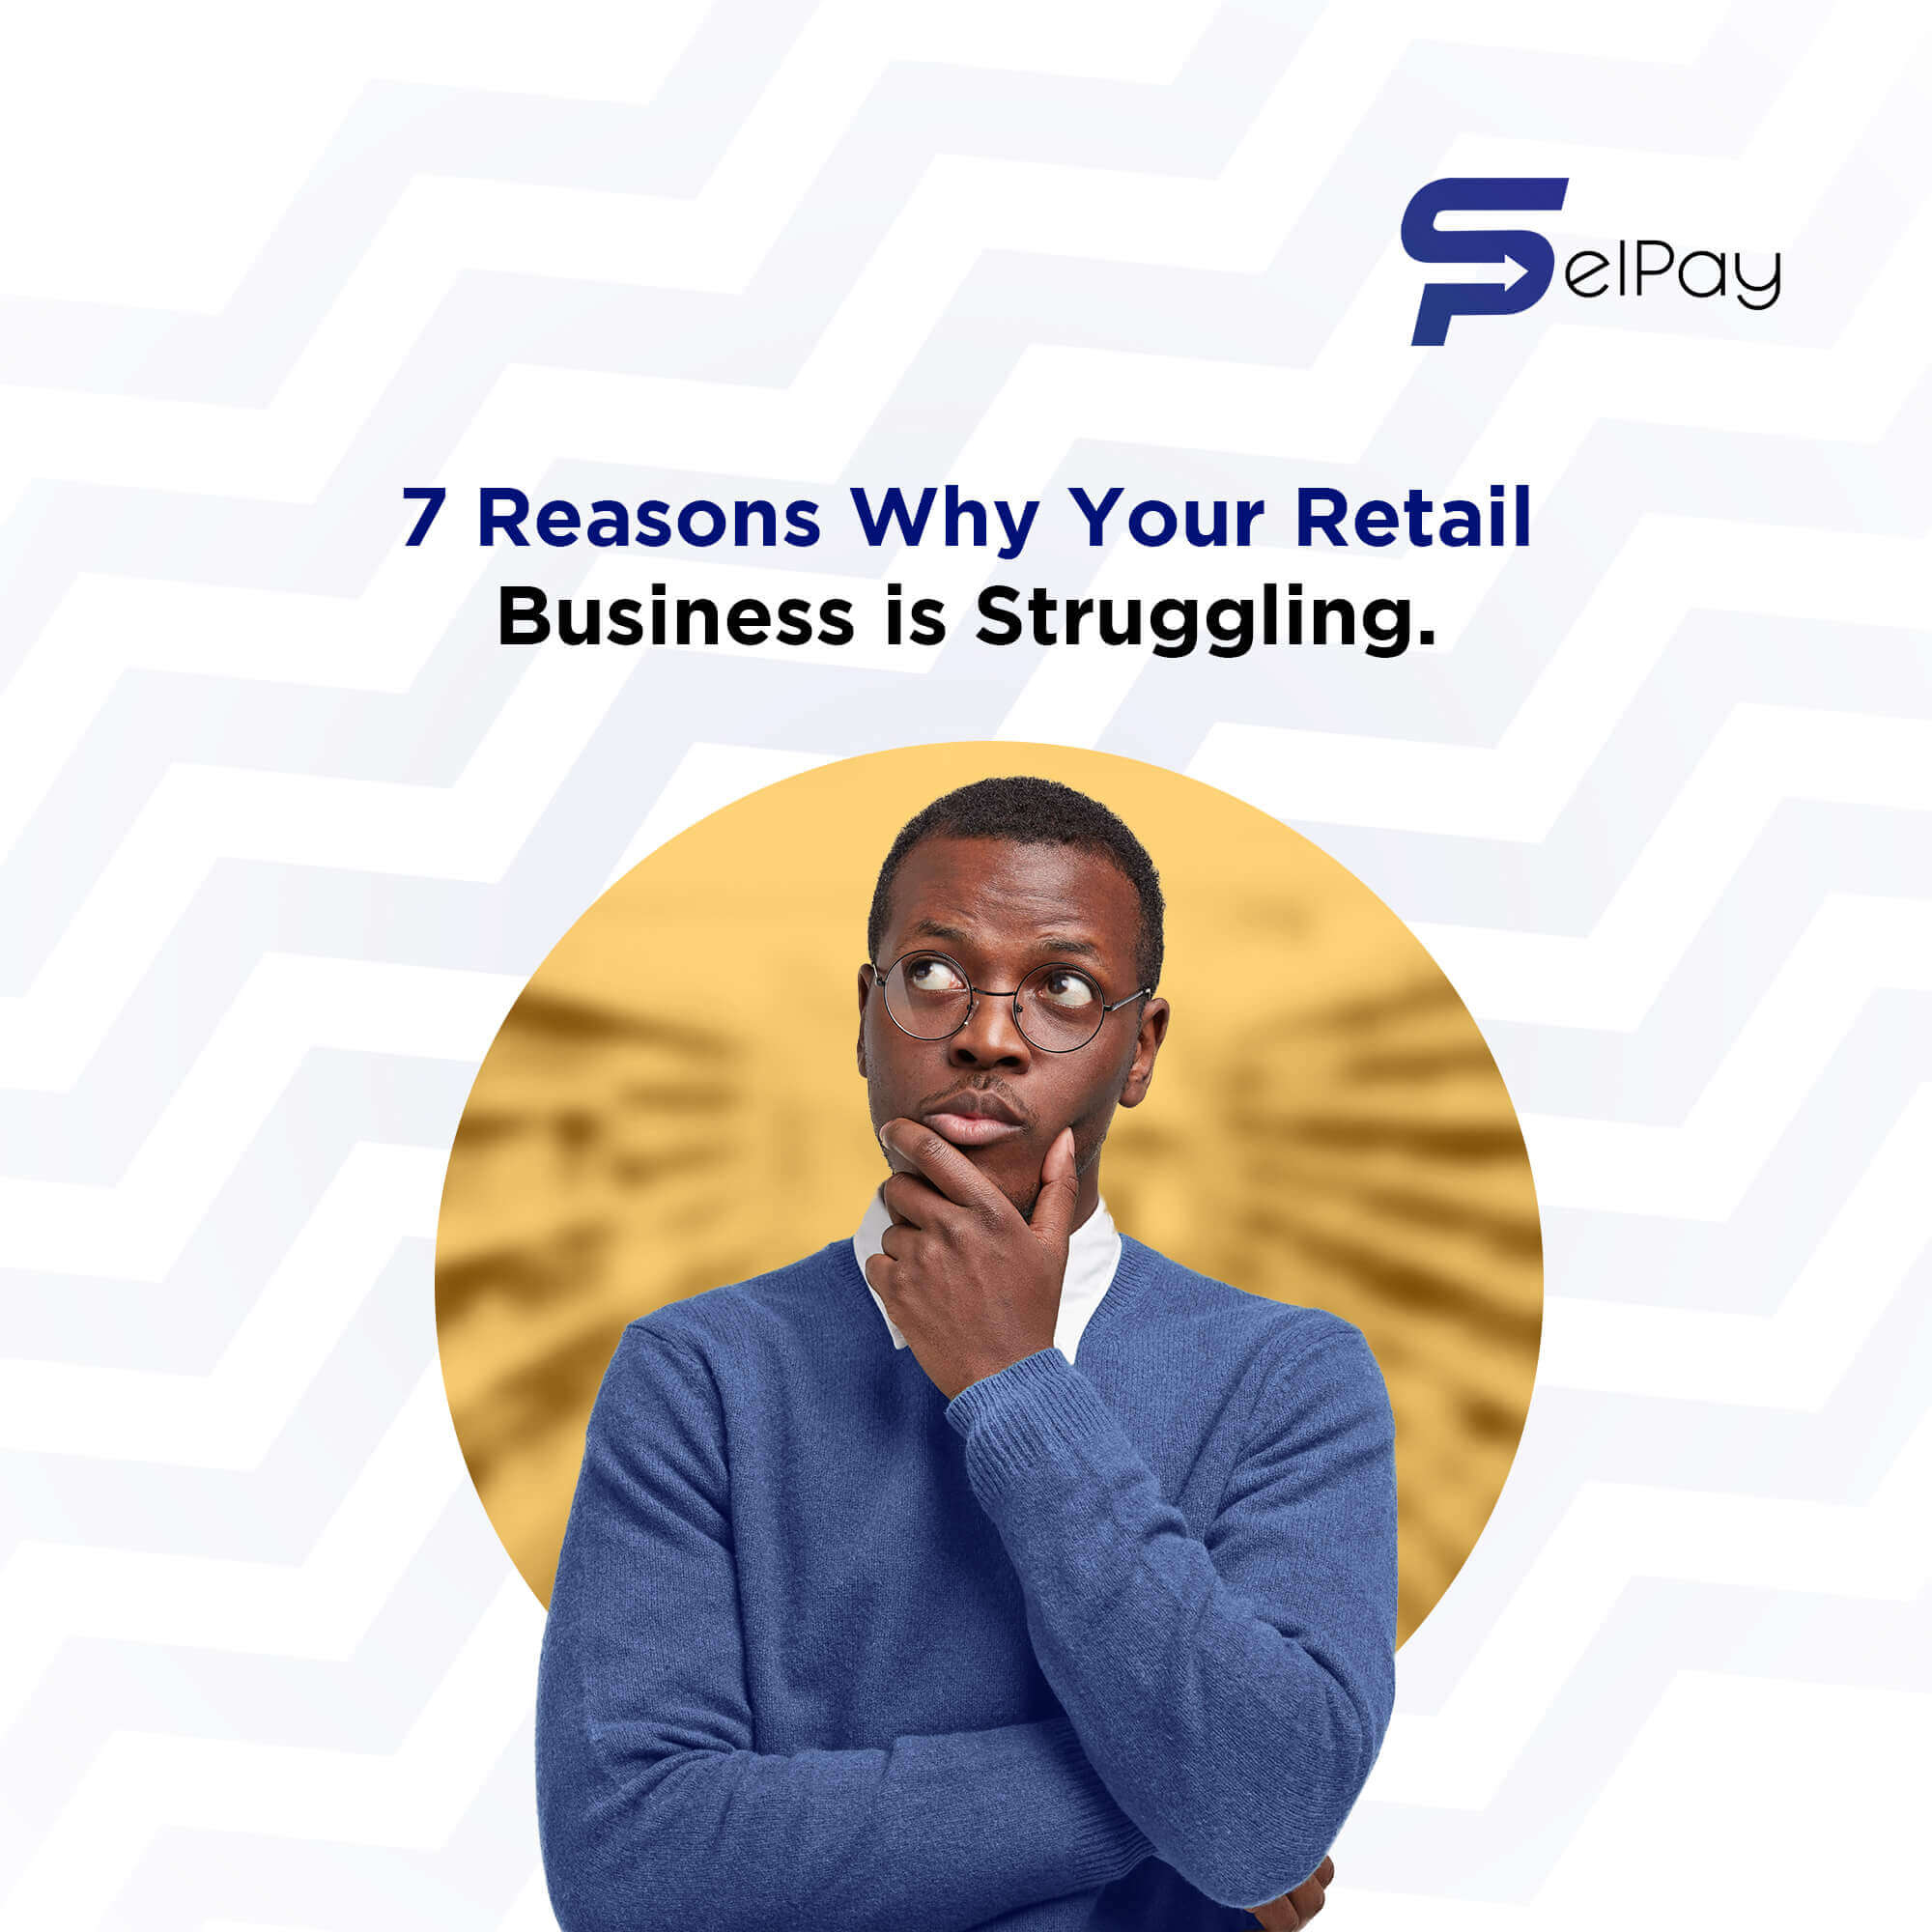 6 Reasons Why Your Retail Business is Struggling